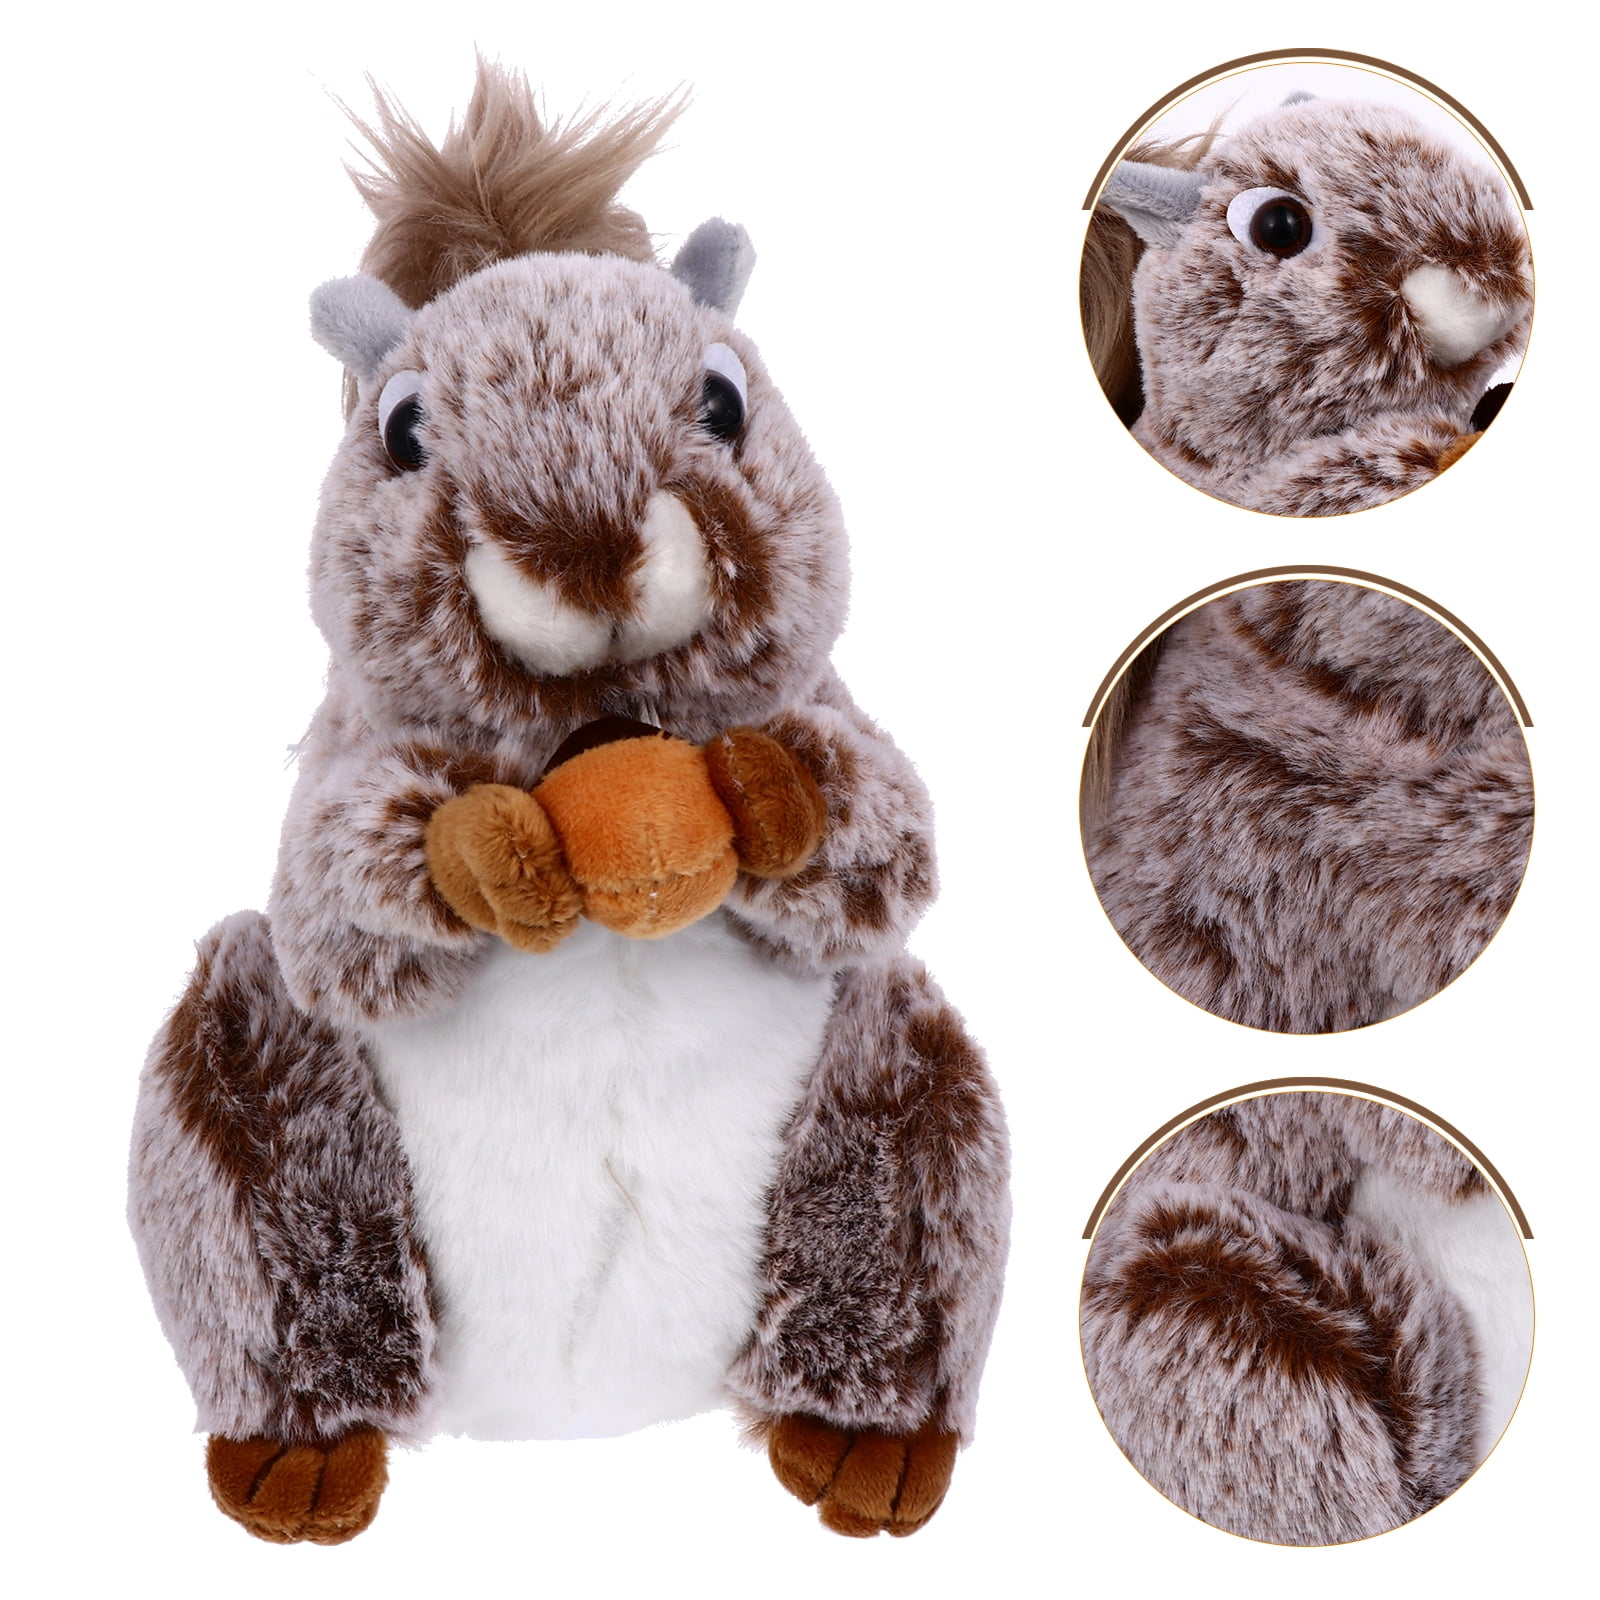 Sing Song Squirrel Stuffed Animal Squirrel Cartoon Plush Soft Toy For Kids Baby 